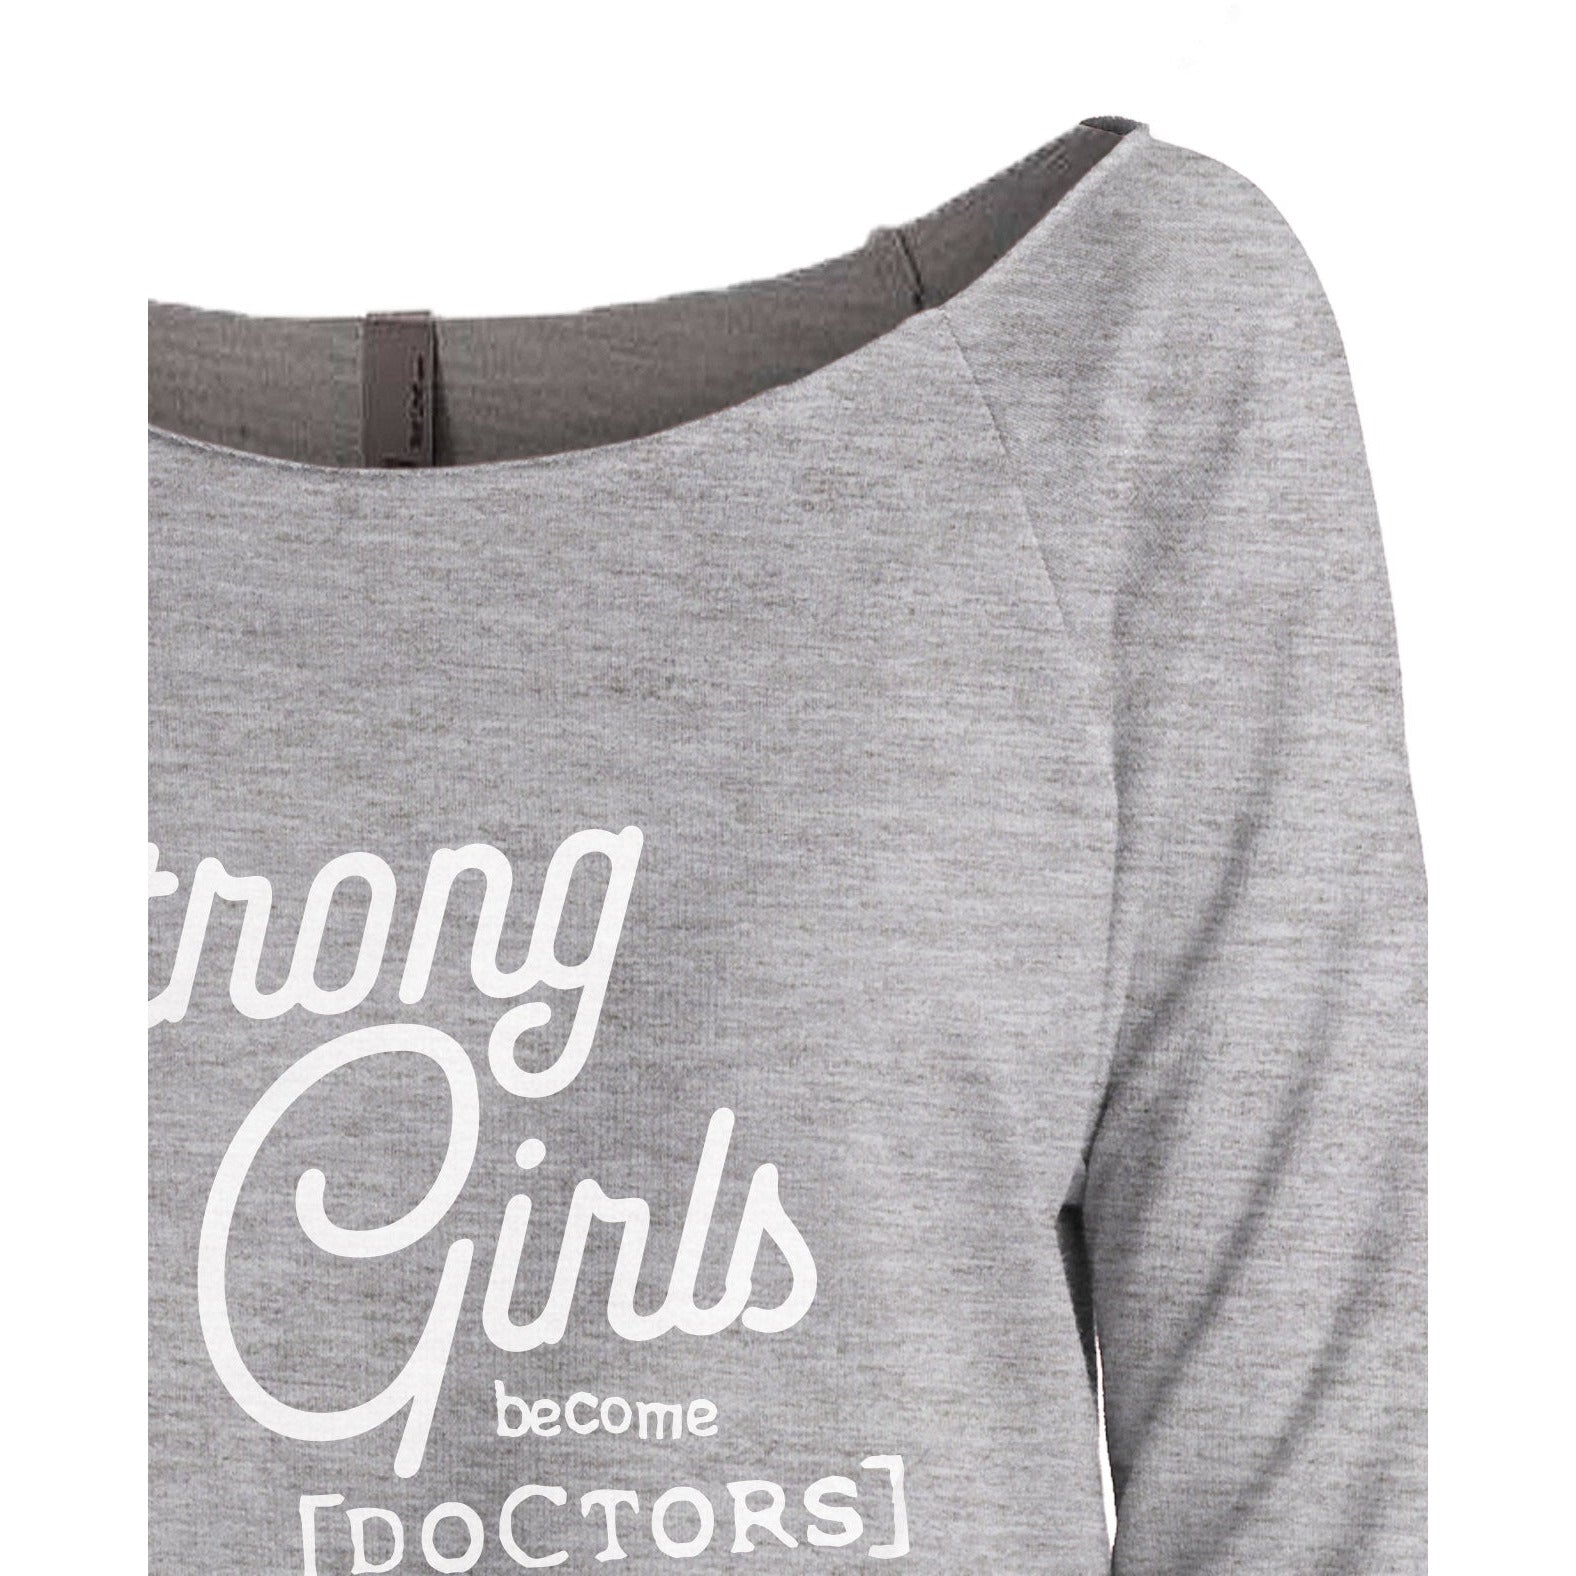 Strong Girls Become Doctors - Stories You Can Wear